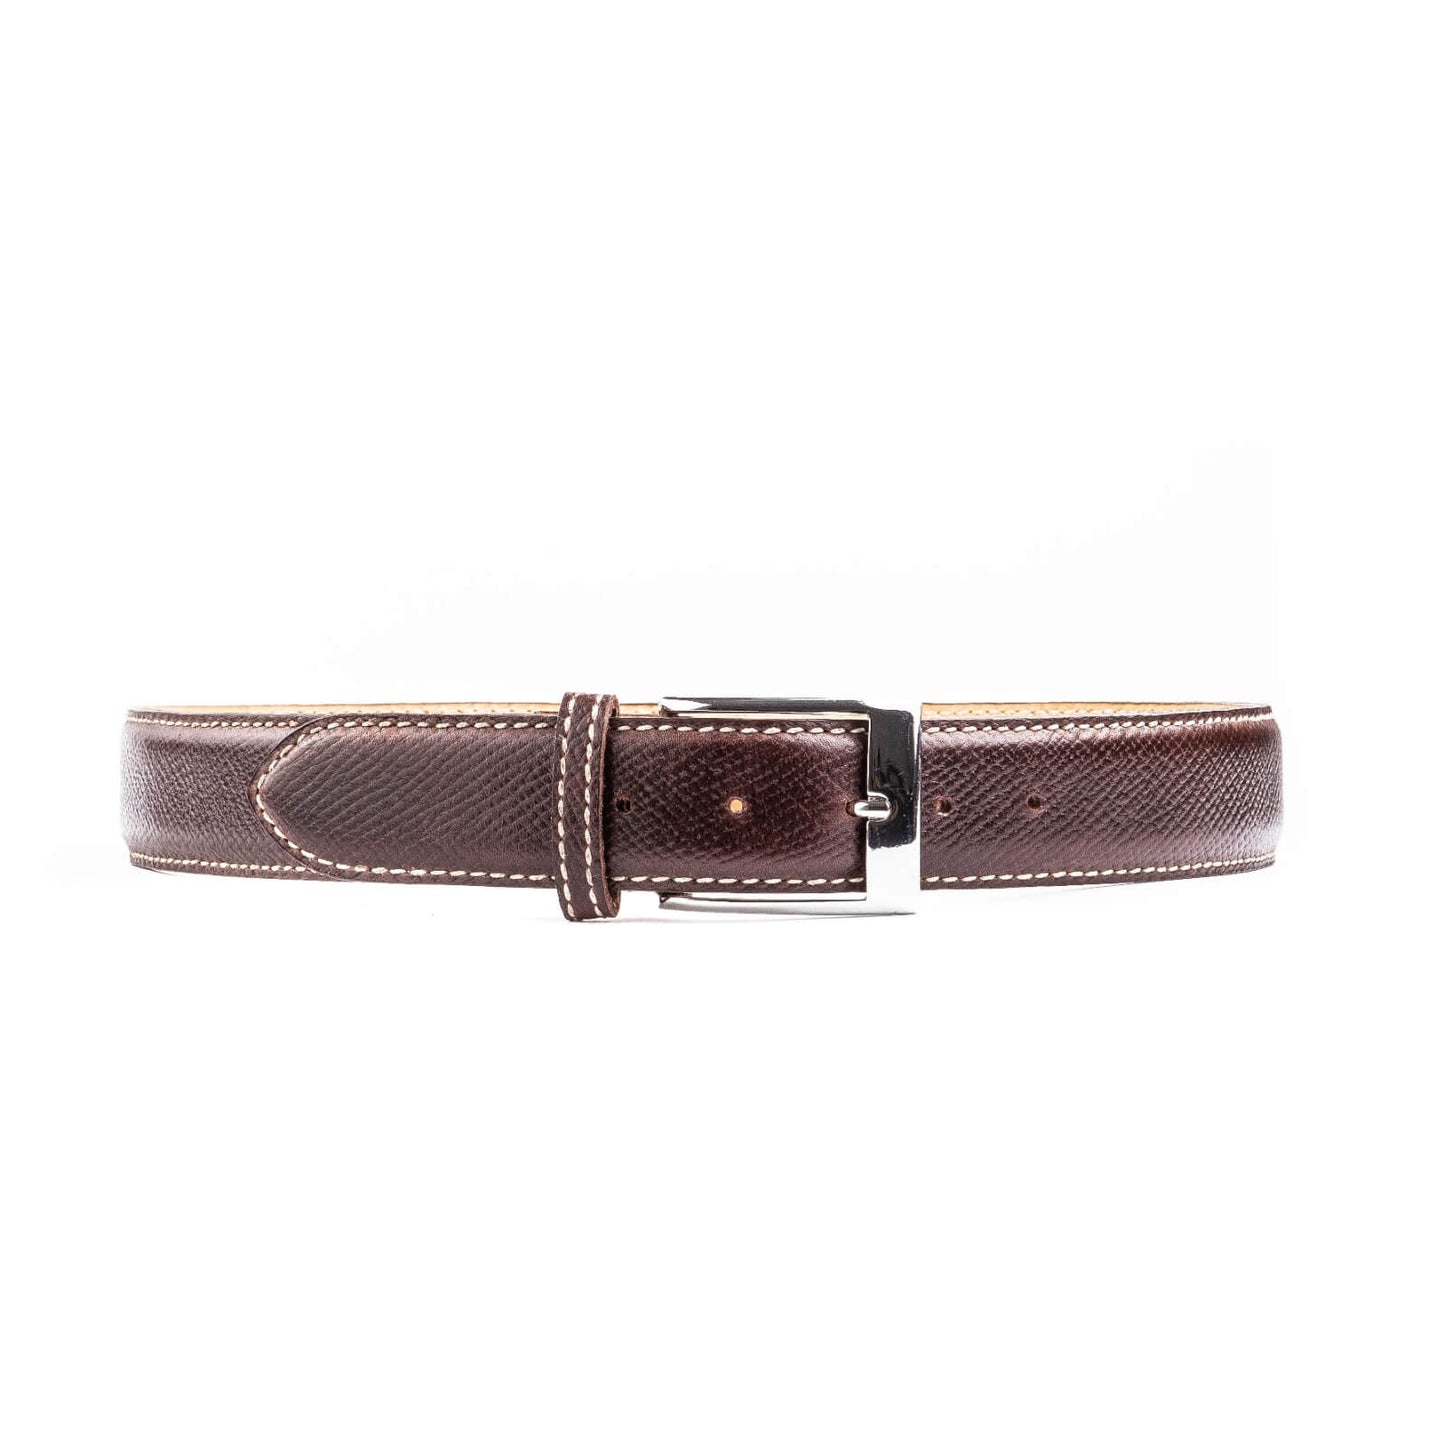 Dark brown Russian calf leather Belt with hand stitched edge